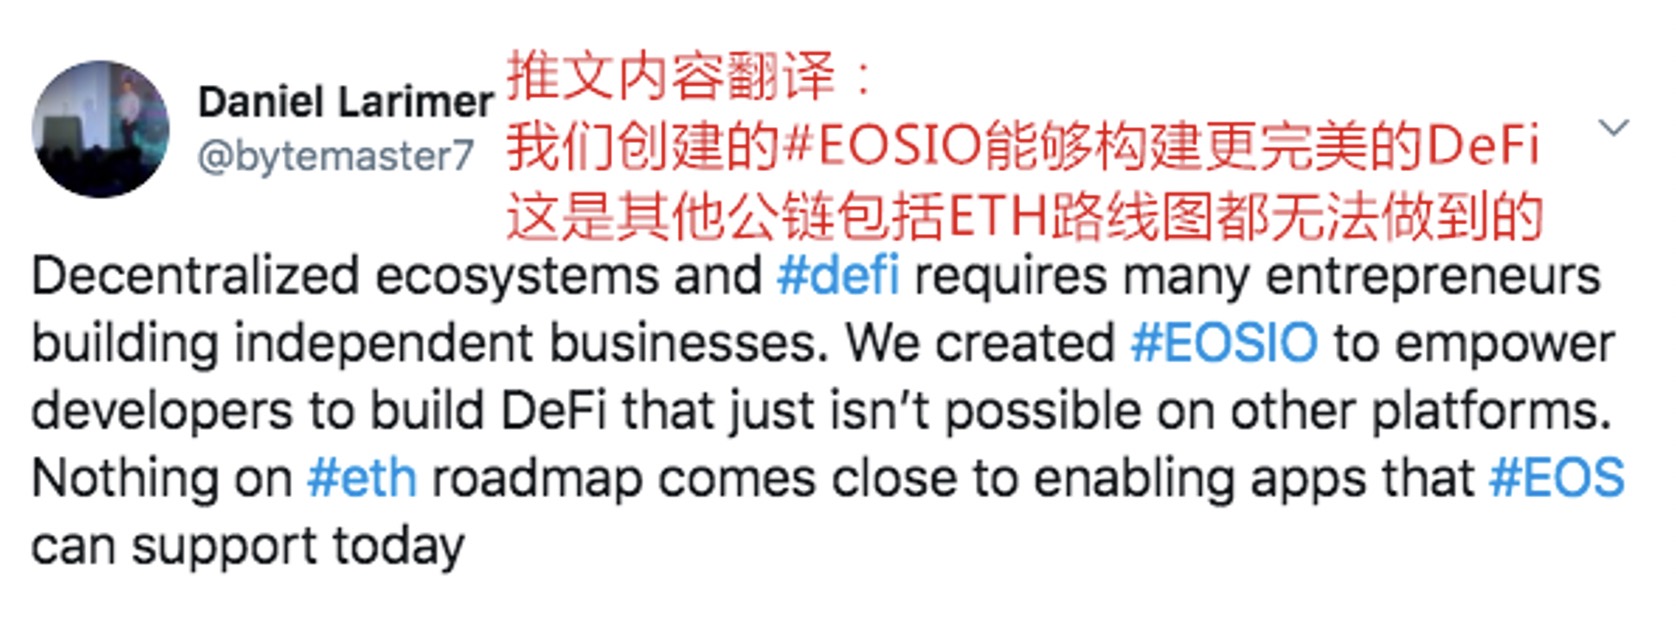 the-possibility-for-defi-on-eos-cn-3